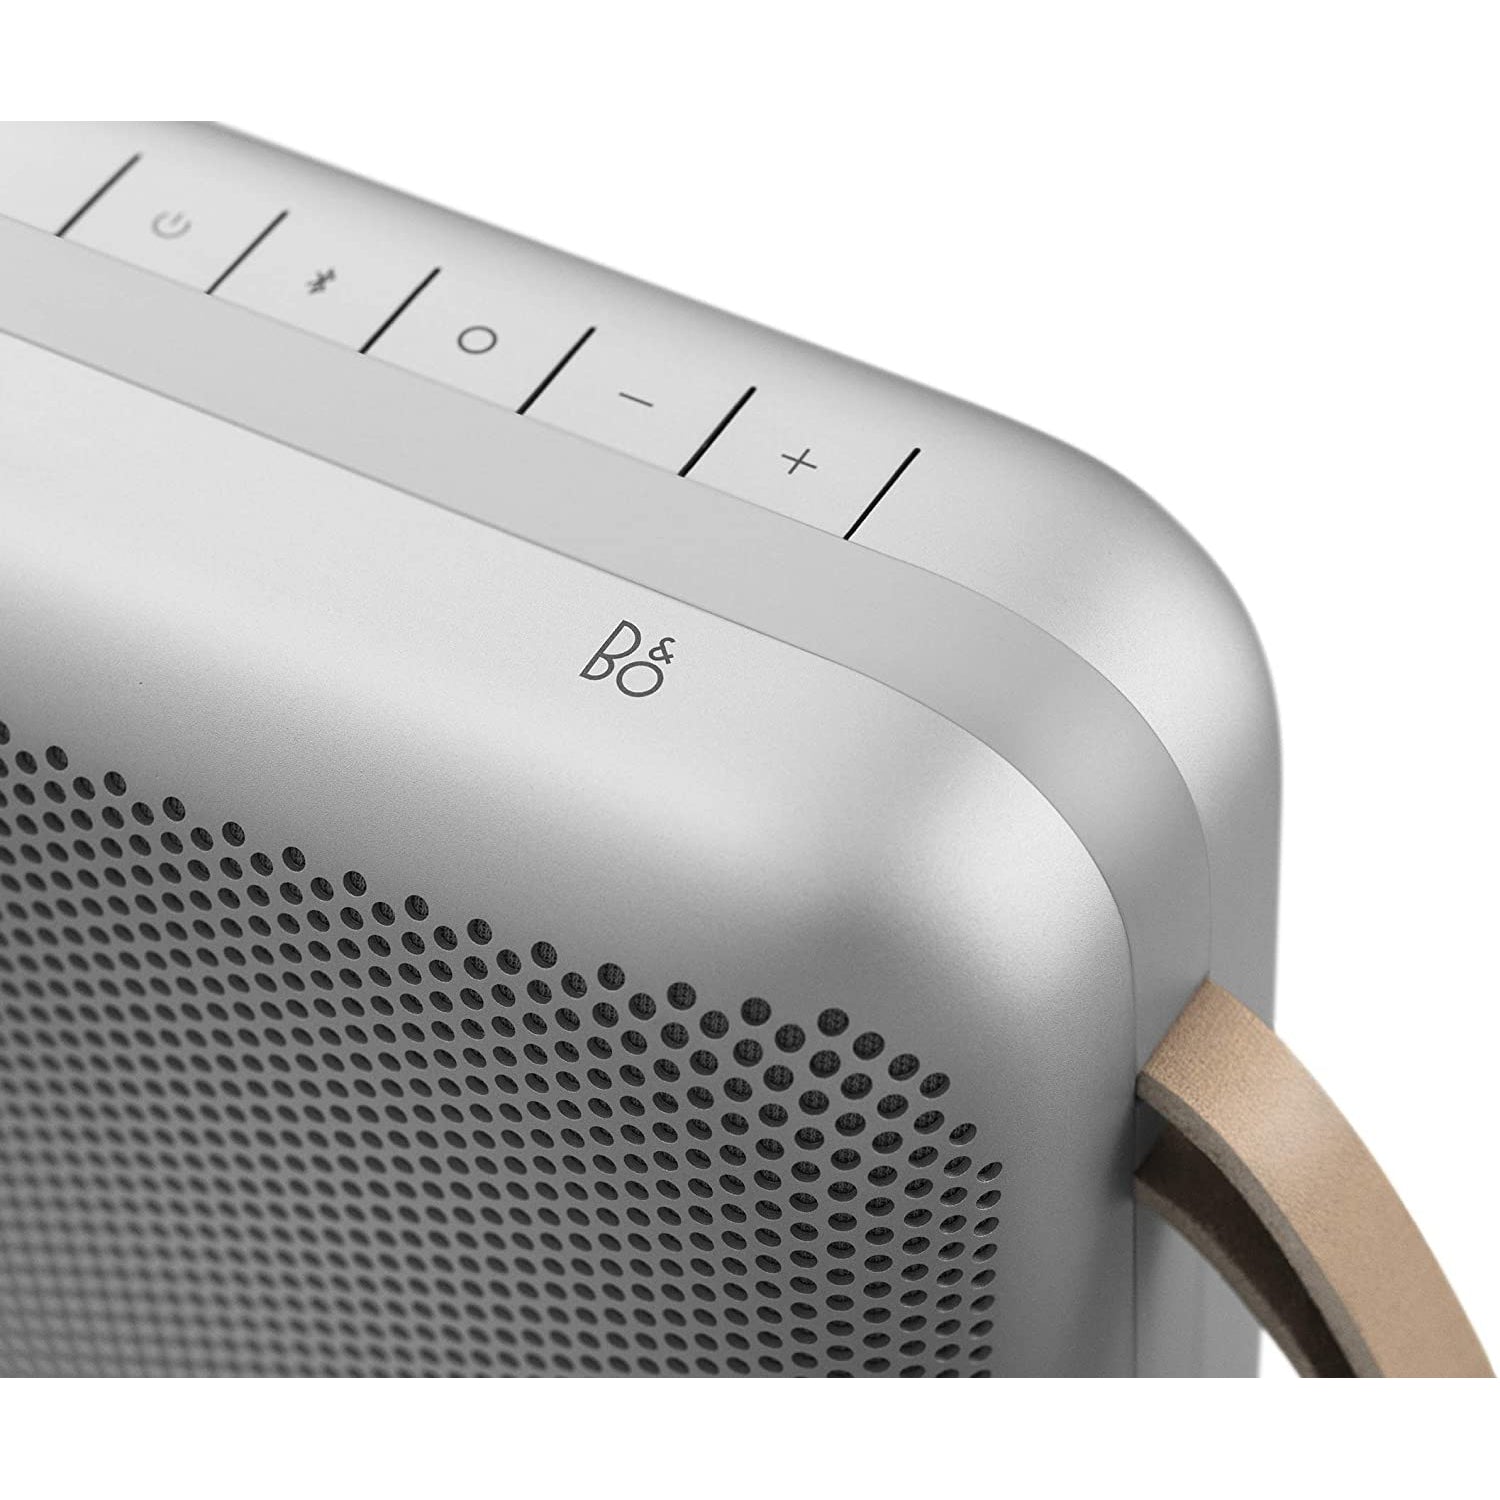 Bang & Olufsen Beoplay P6 Portable Bluetooth Speaker, Natural